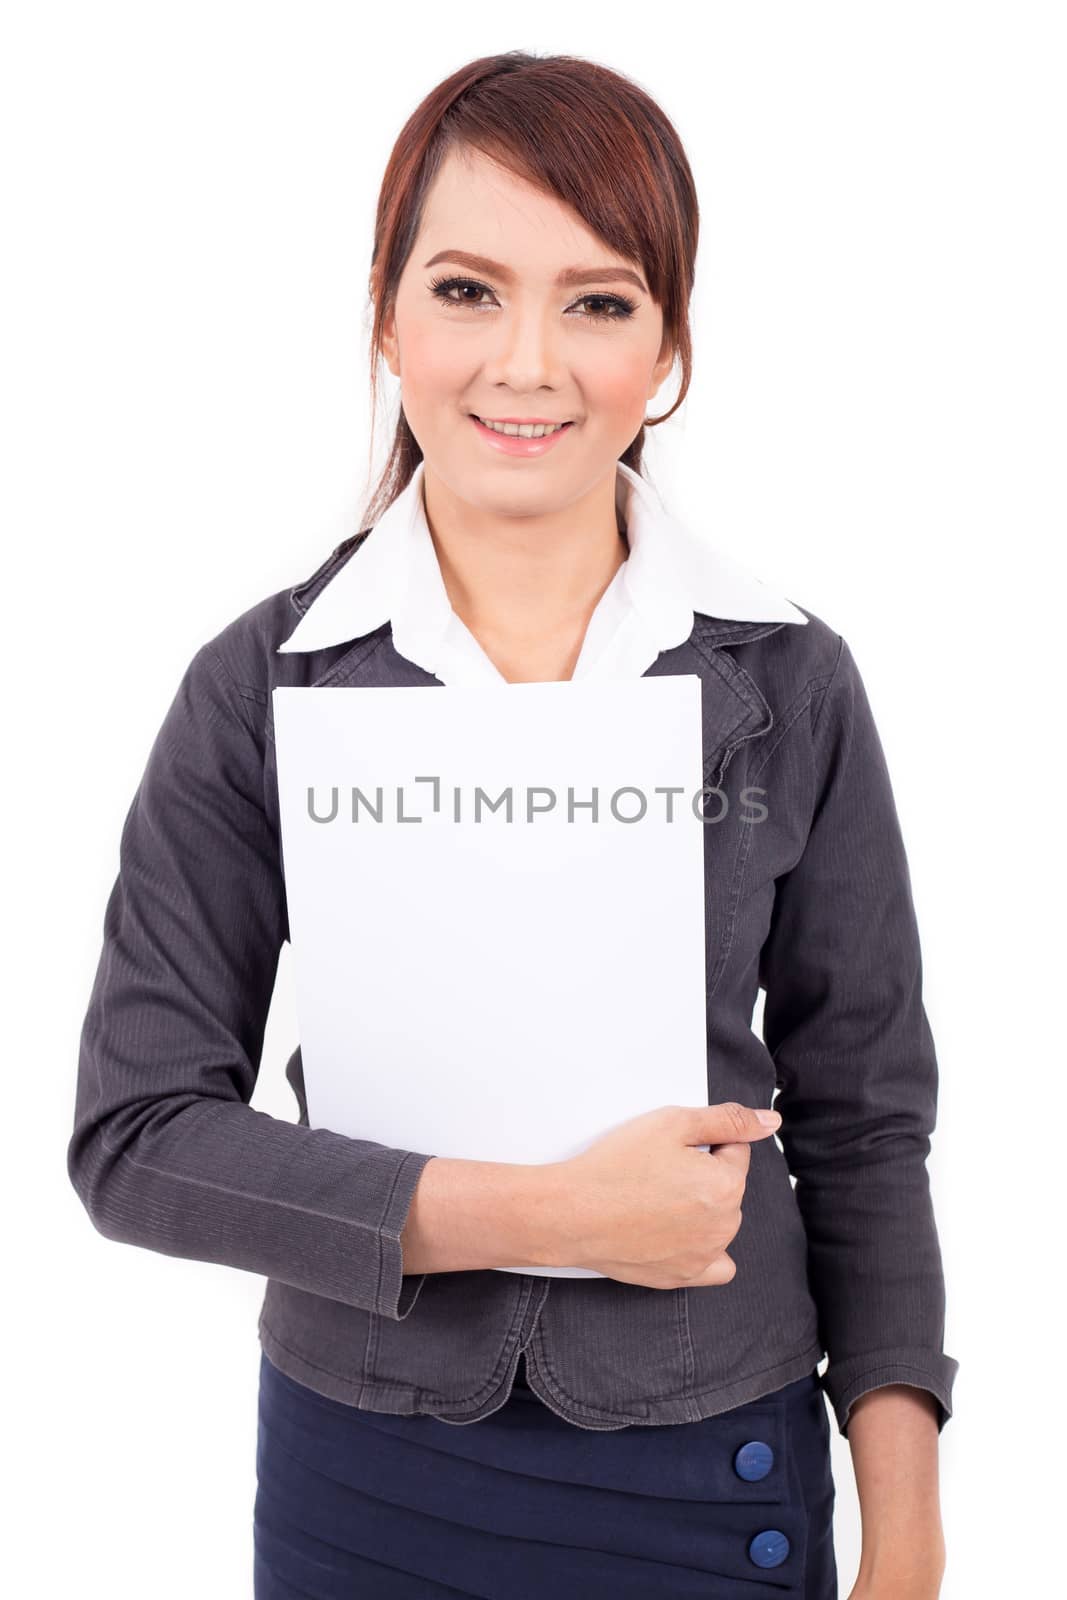 Happy smiling young business woman holding blank signboard, over white background by powerbeephoto